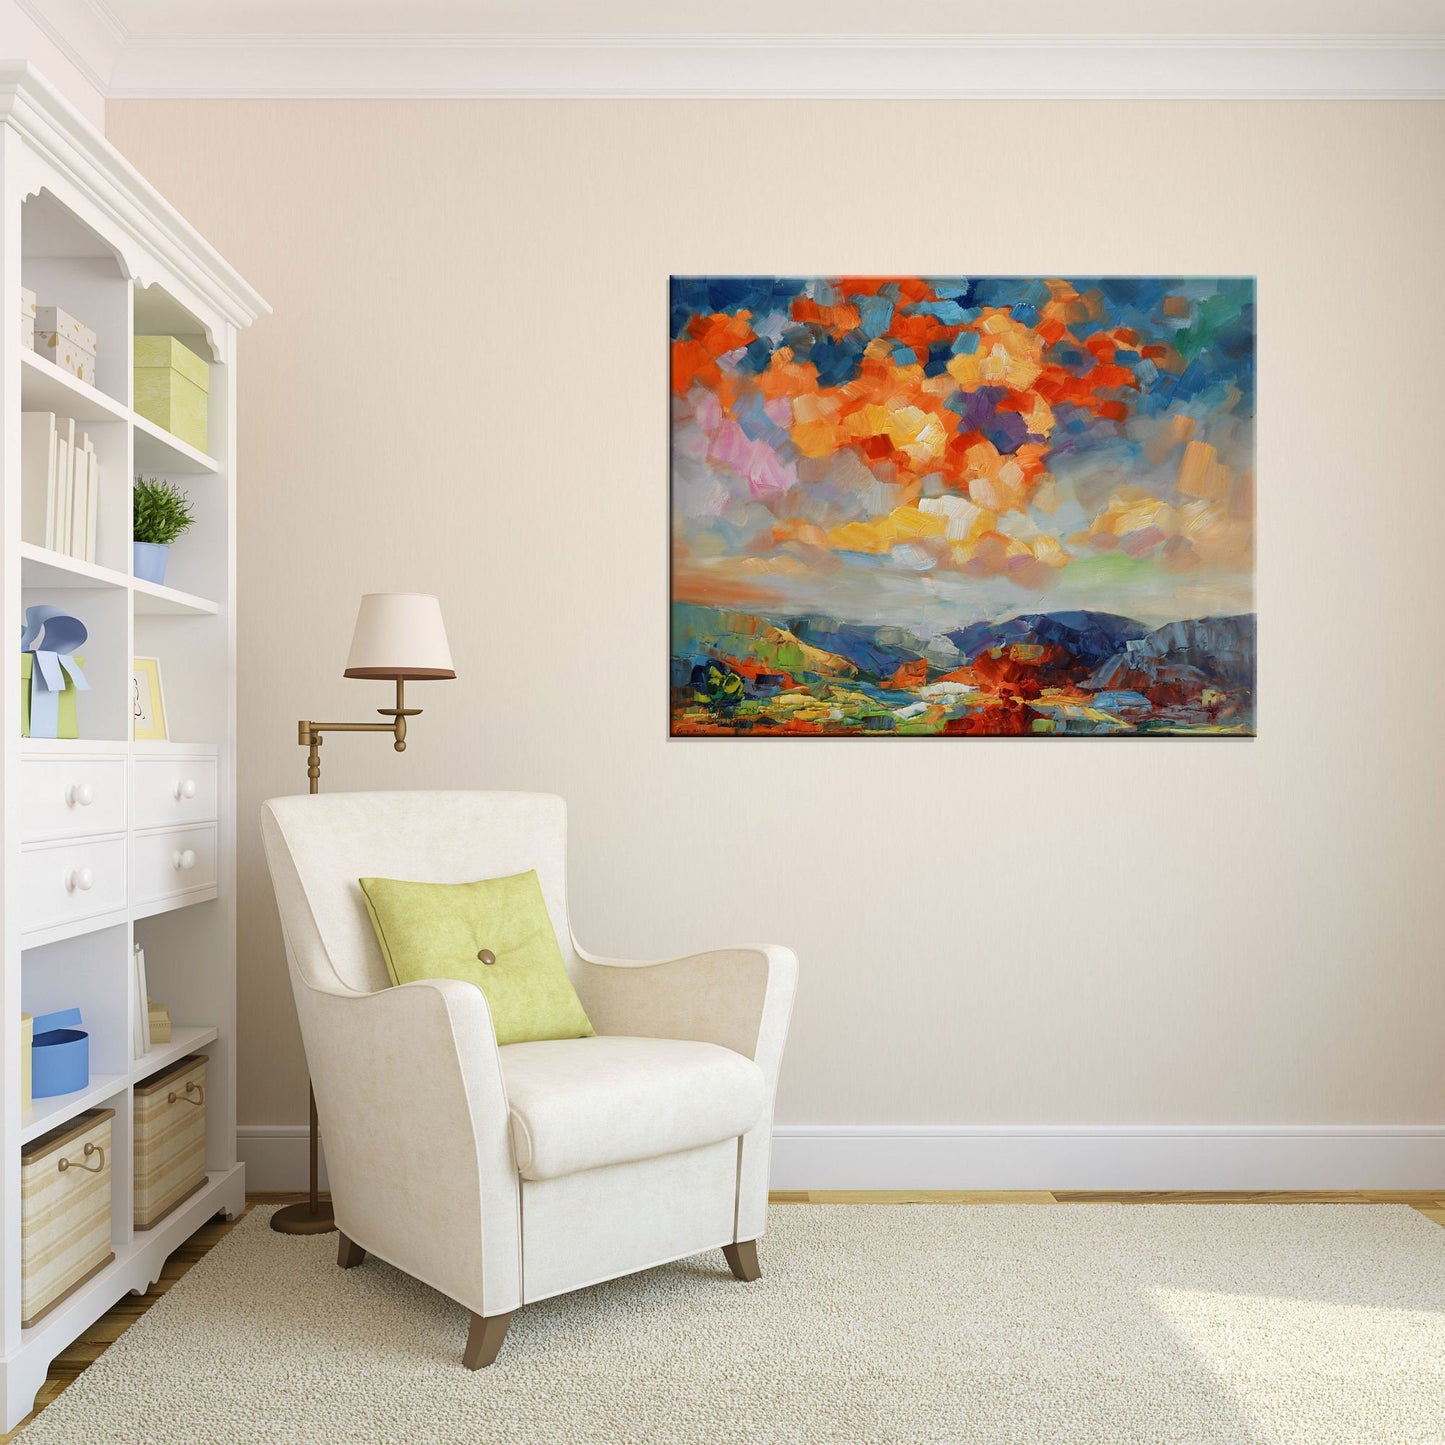 Large Oil Painting Landscape, Abstract Painting, Tuscany Sunset, Contemporary Painting, Original Landscape Painting, Abstract Art Wall Decor